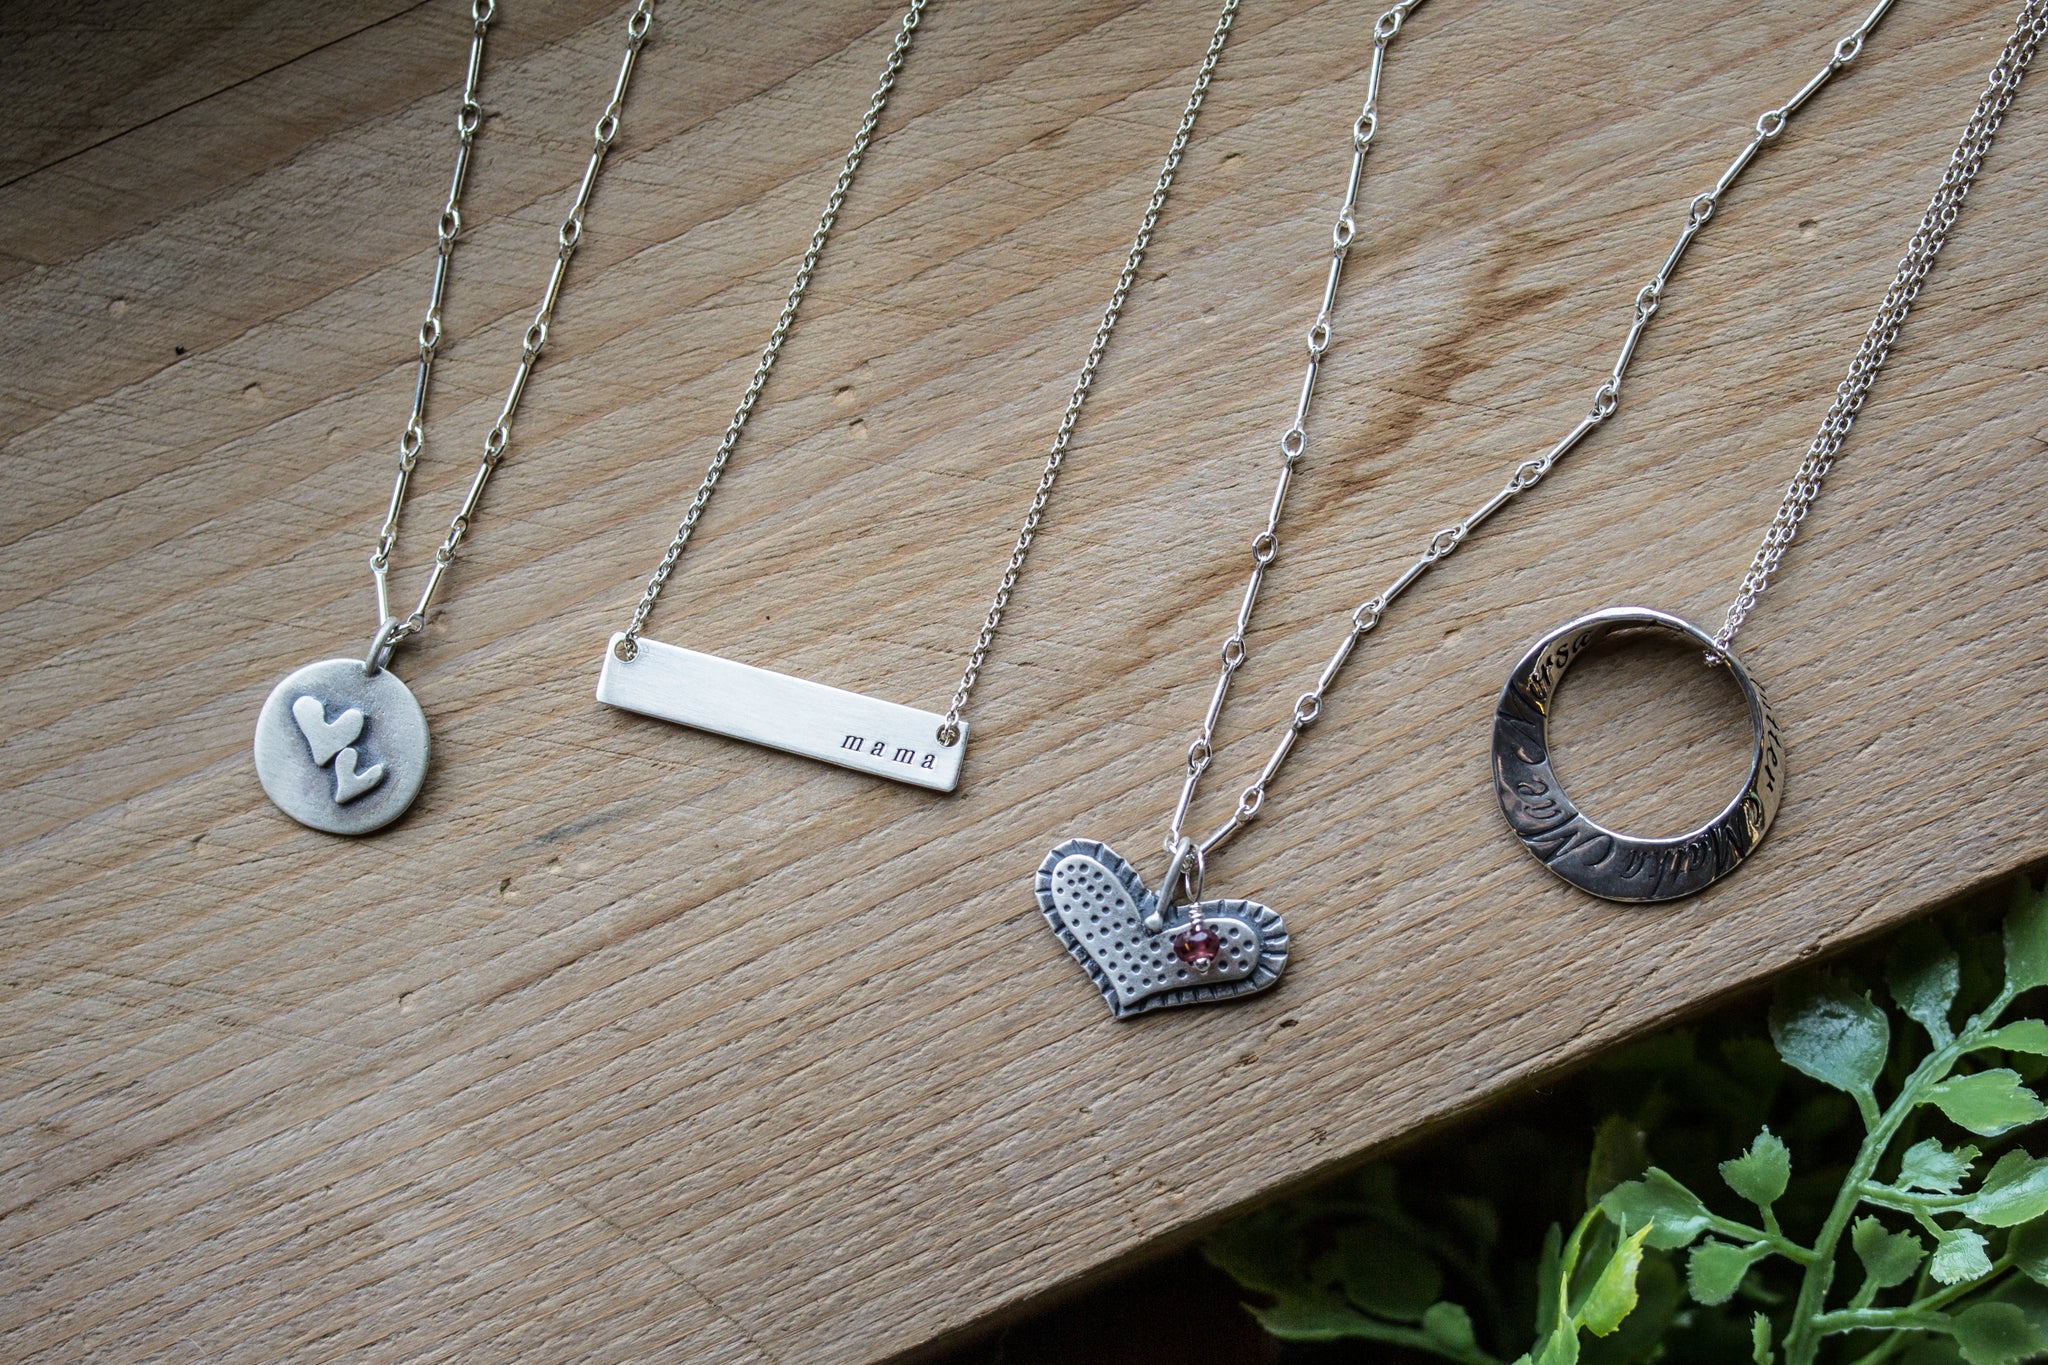 Stamped Silver Jewelry Necklaces